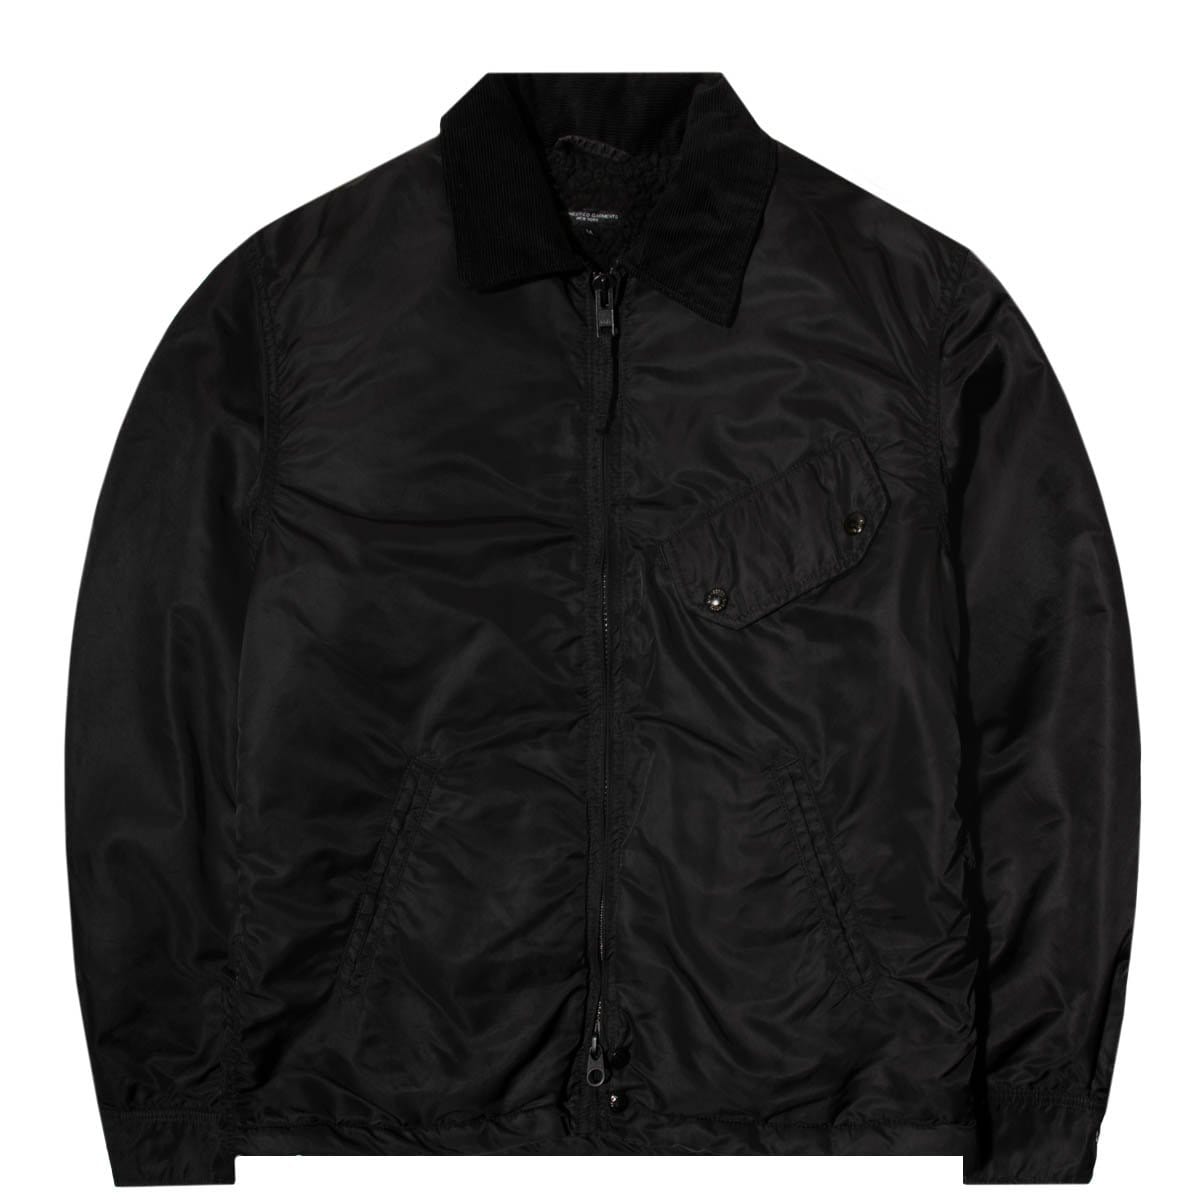 Engineered Garments Outerwear DRIVER JACKET